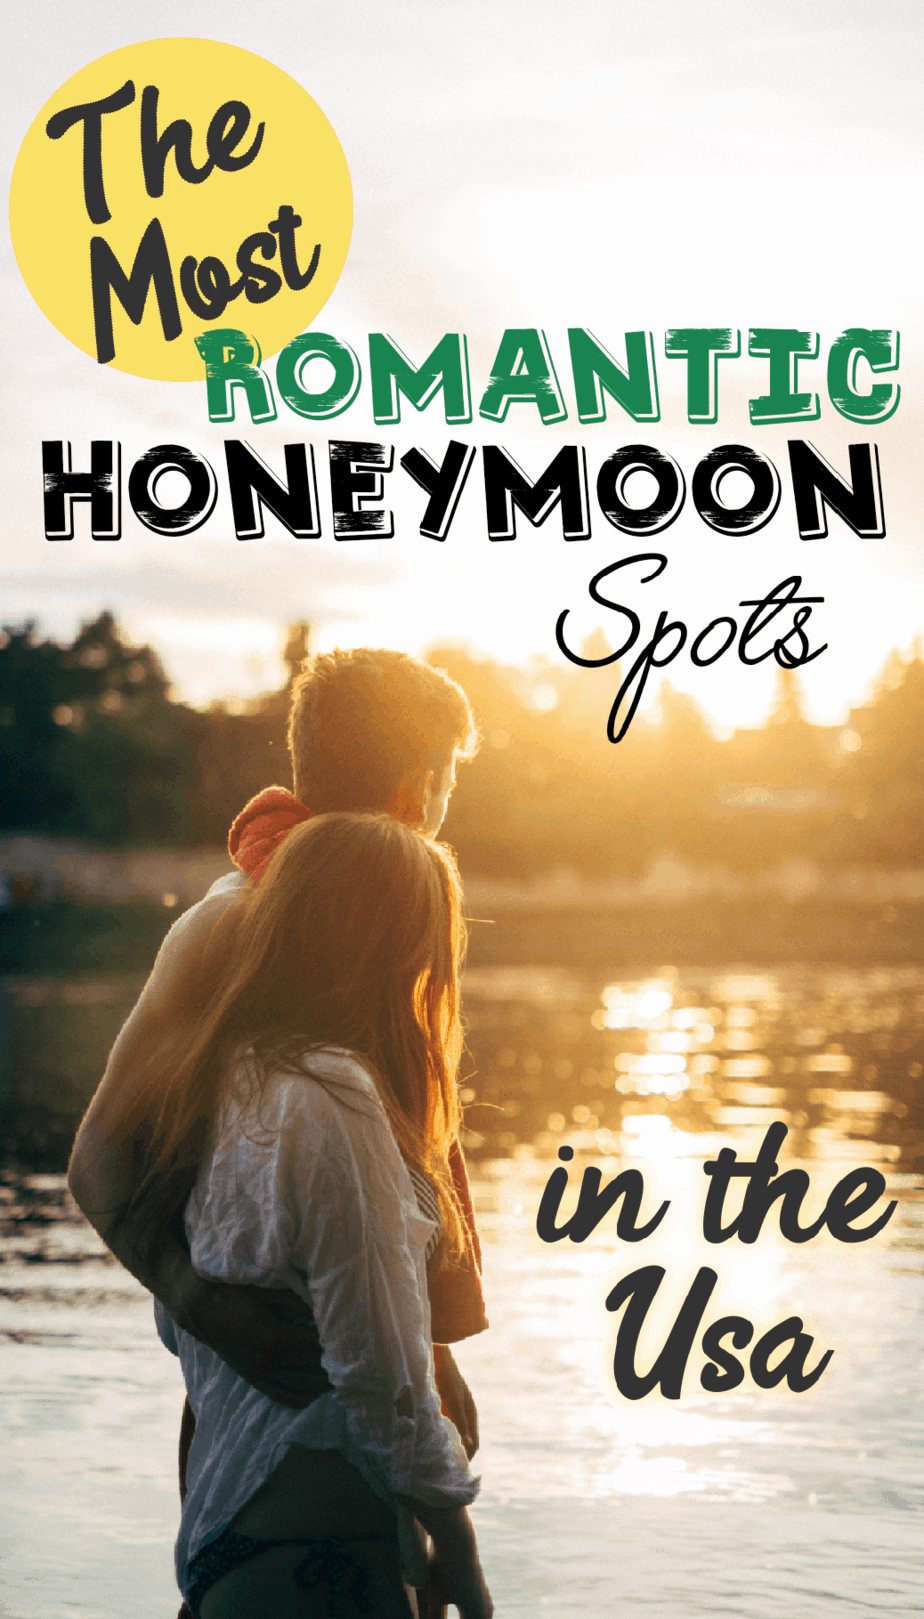 Pinterest social image that says "The Most Romantic Honeymoon Spots in the USA."